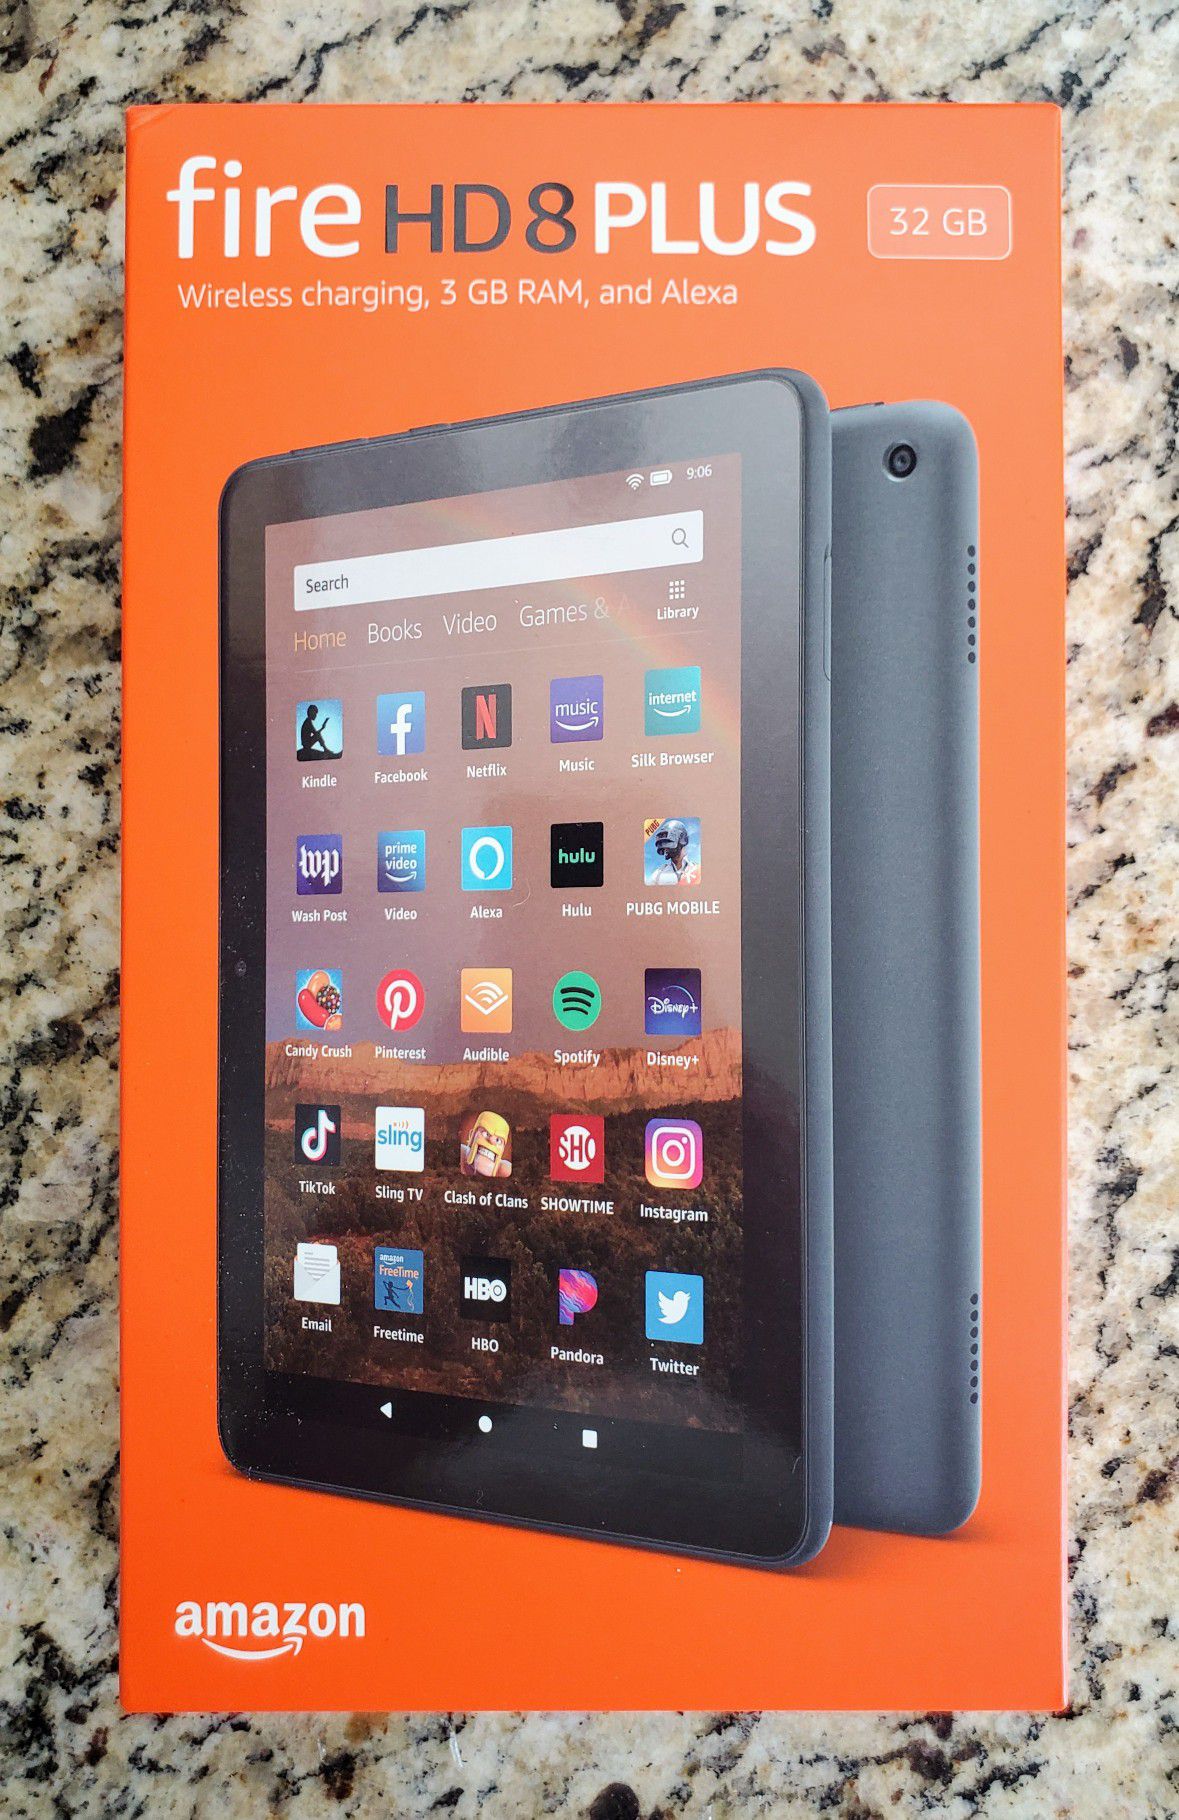 Amazon Kindle Fire HD 8 Plus (Slate) w/ No Special Offers | Brand New/Never Used!